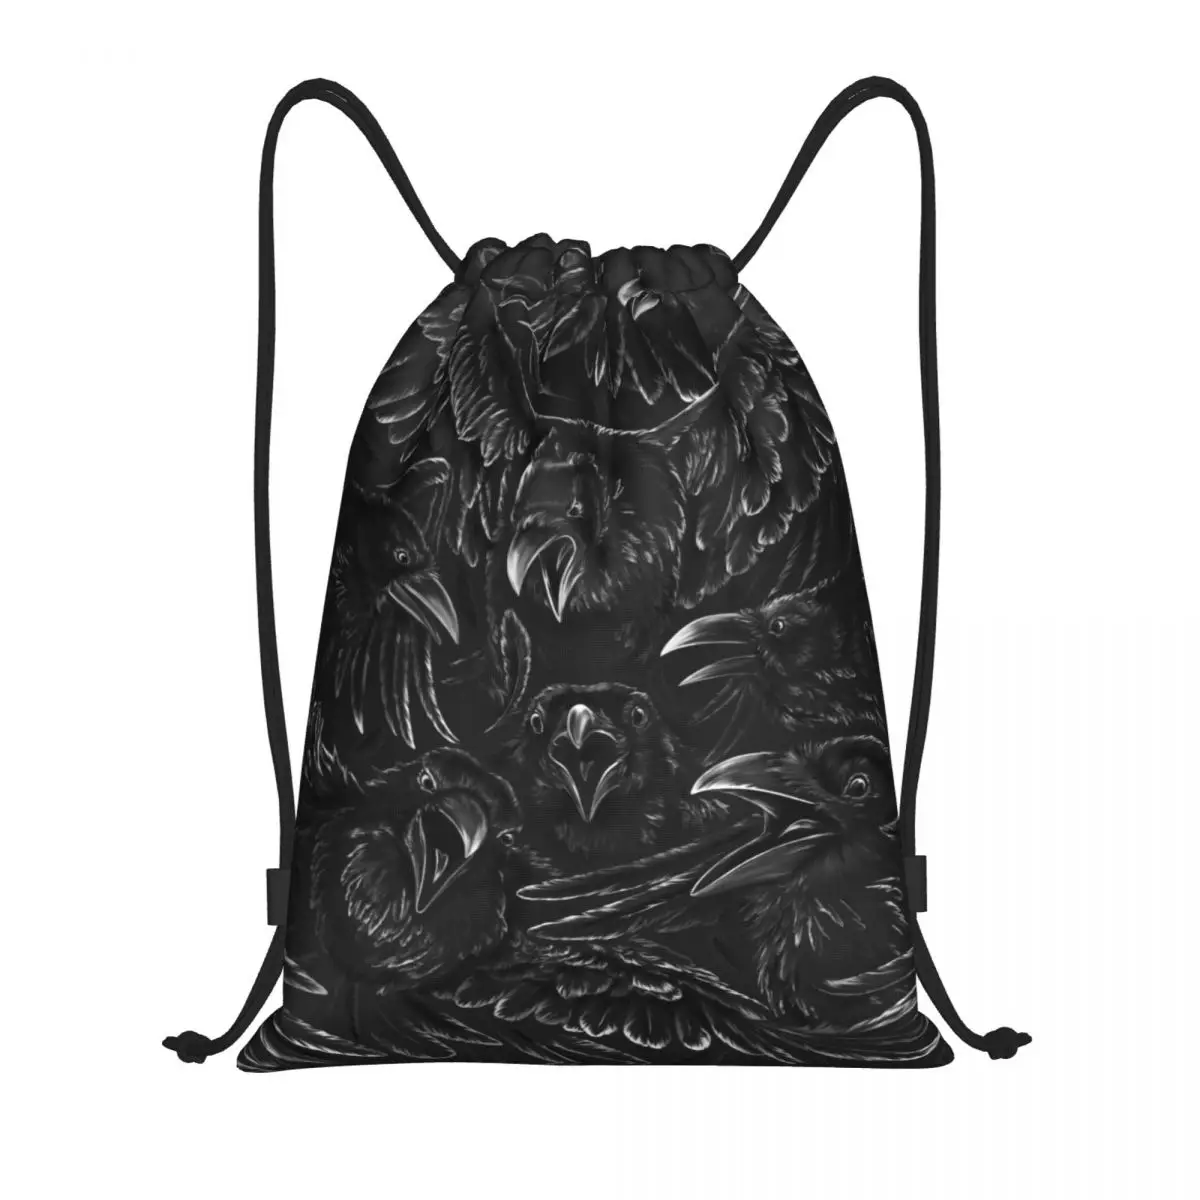 

Raven Rage Drawstring Backpack Sports Gym Bag for Women Men Halloween Witch Gothic Scary Crow Training Sackpack